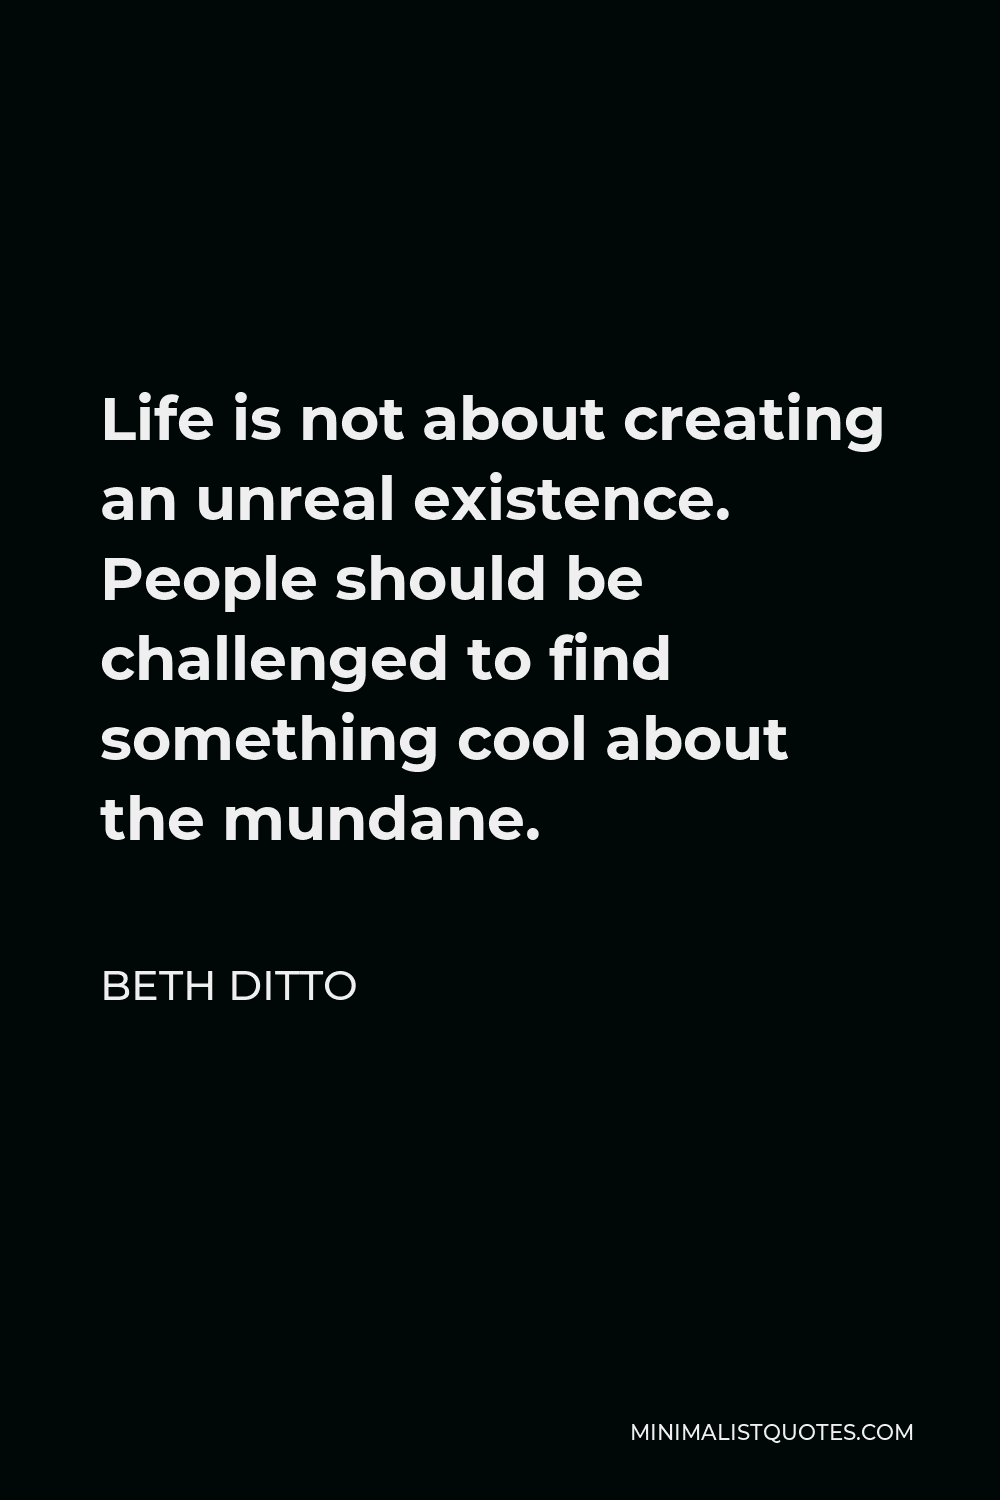 Beth Ditto Quote - Life is not about creating an unreal existence. People should be challenged to find something cool about the mundane.